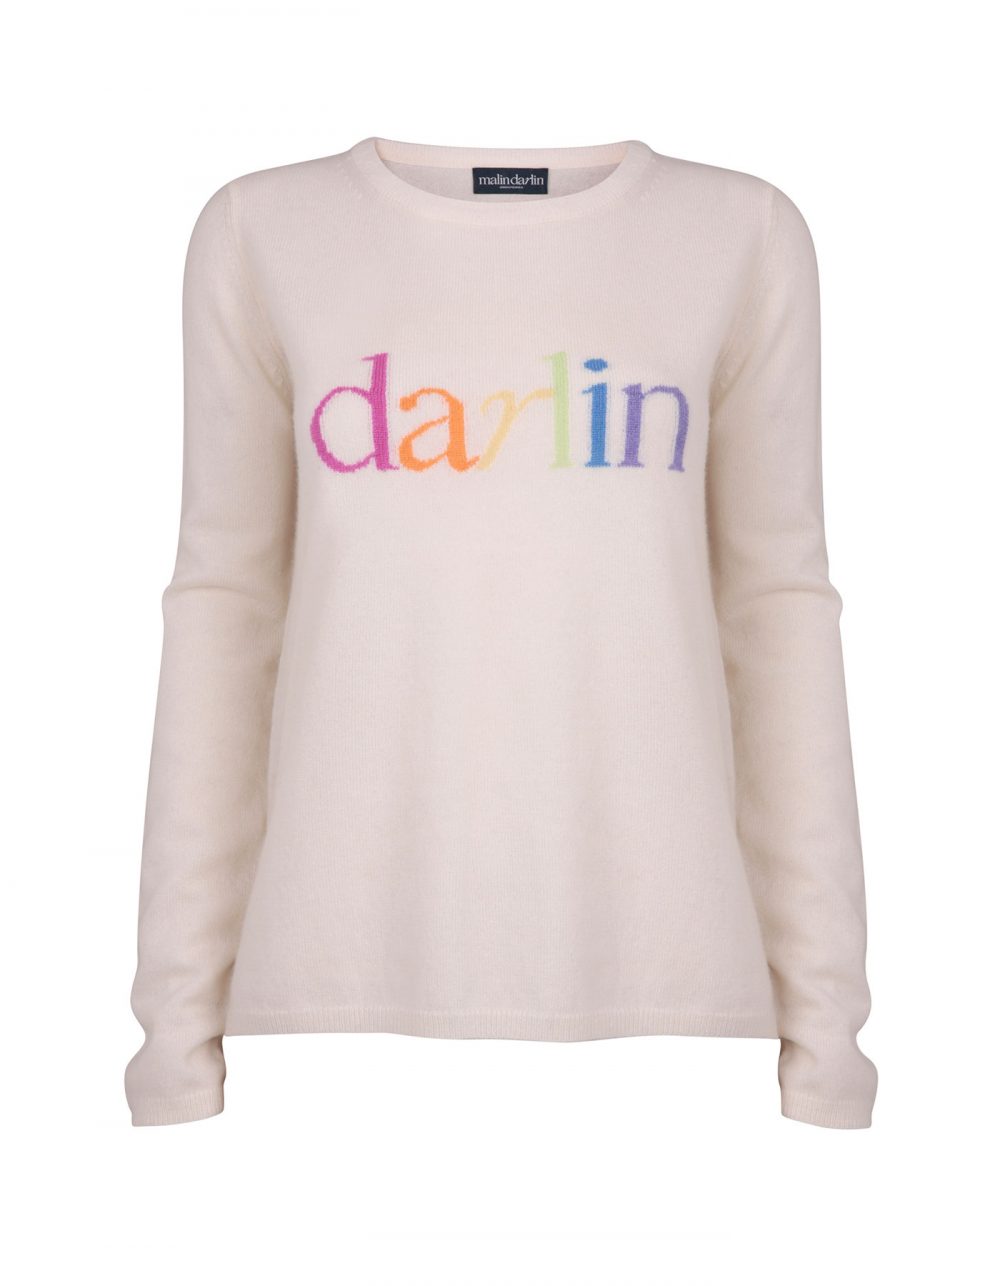 Image of darlin pastel cashmere knitwear, a signature style in malin darlin womens jumpers, against a white background.